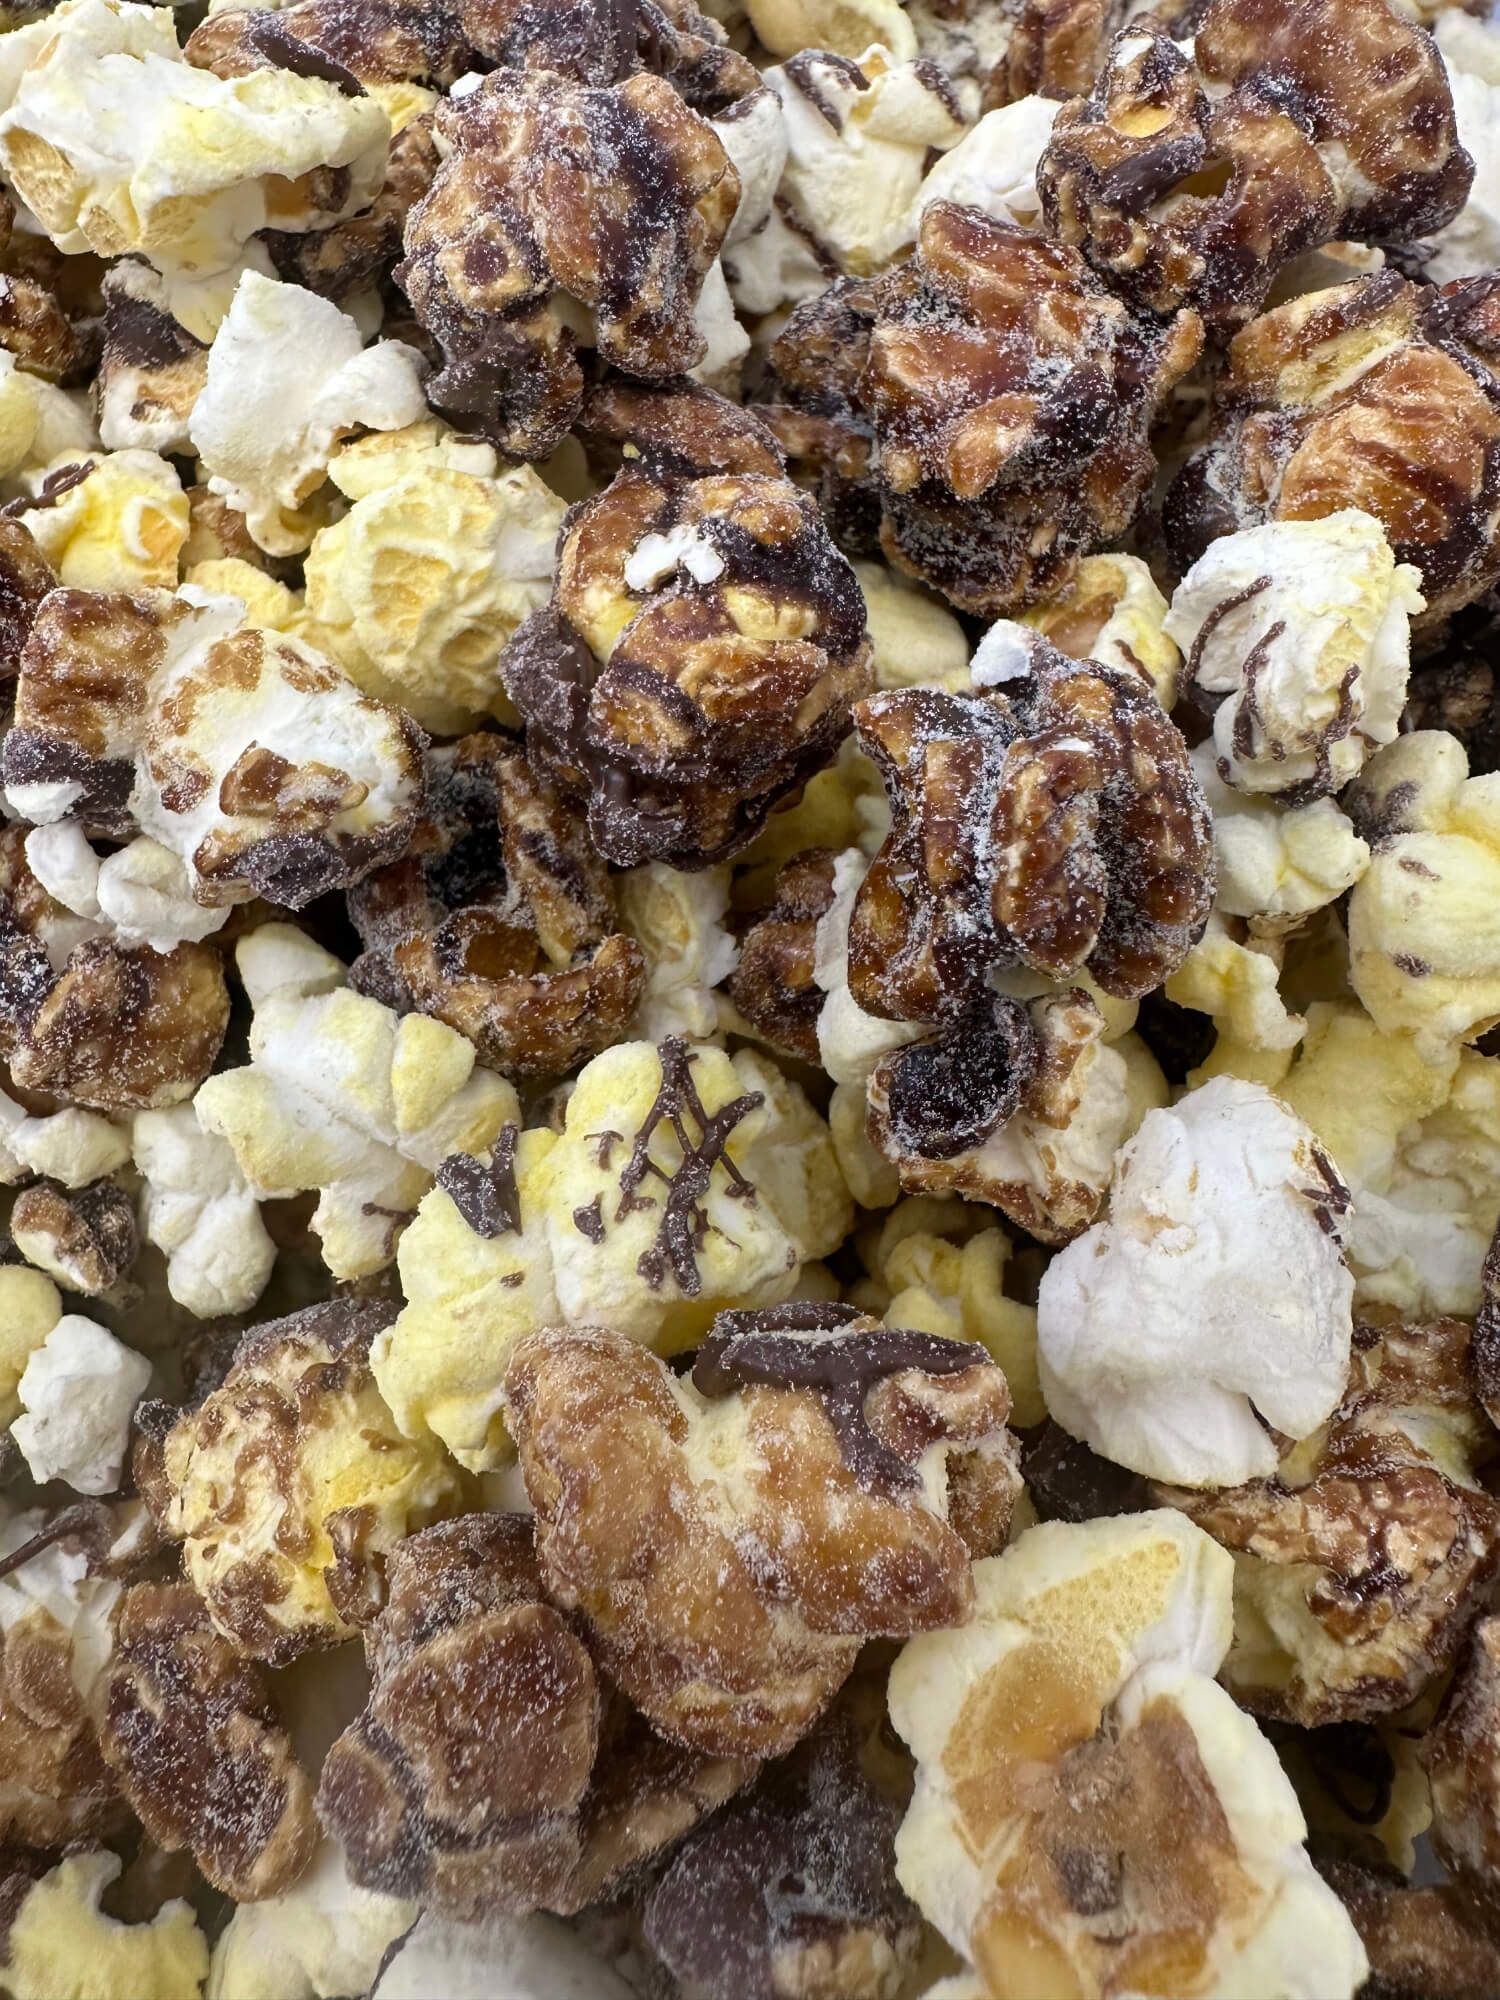 A close up of a pile of chocolate covered popcorn.